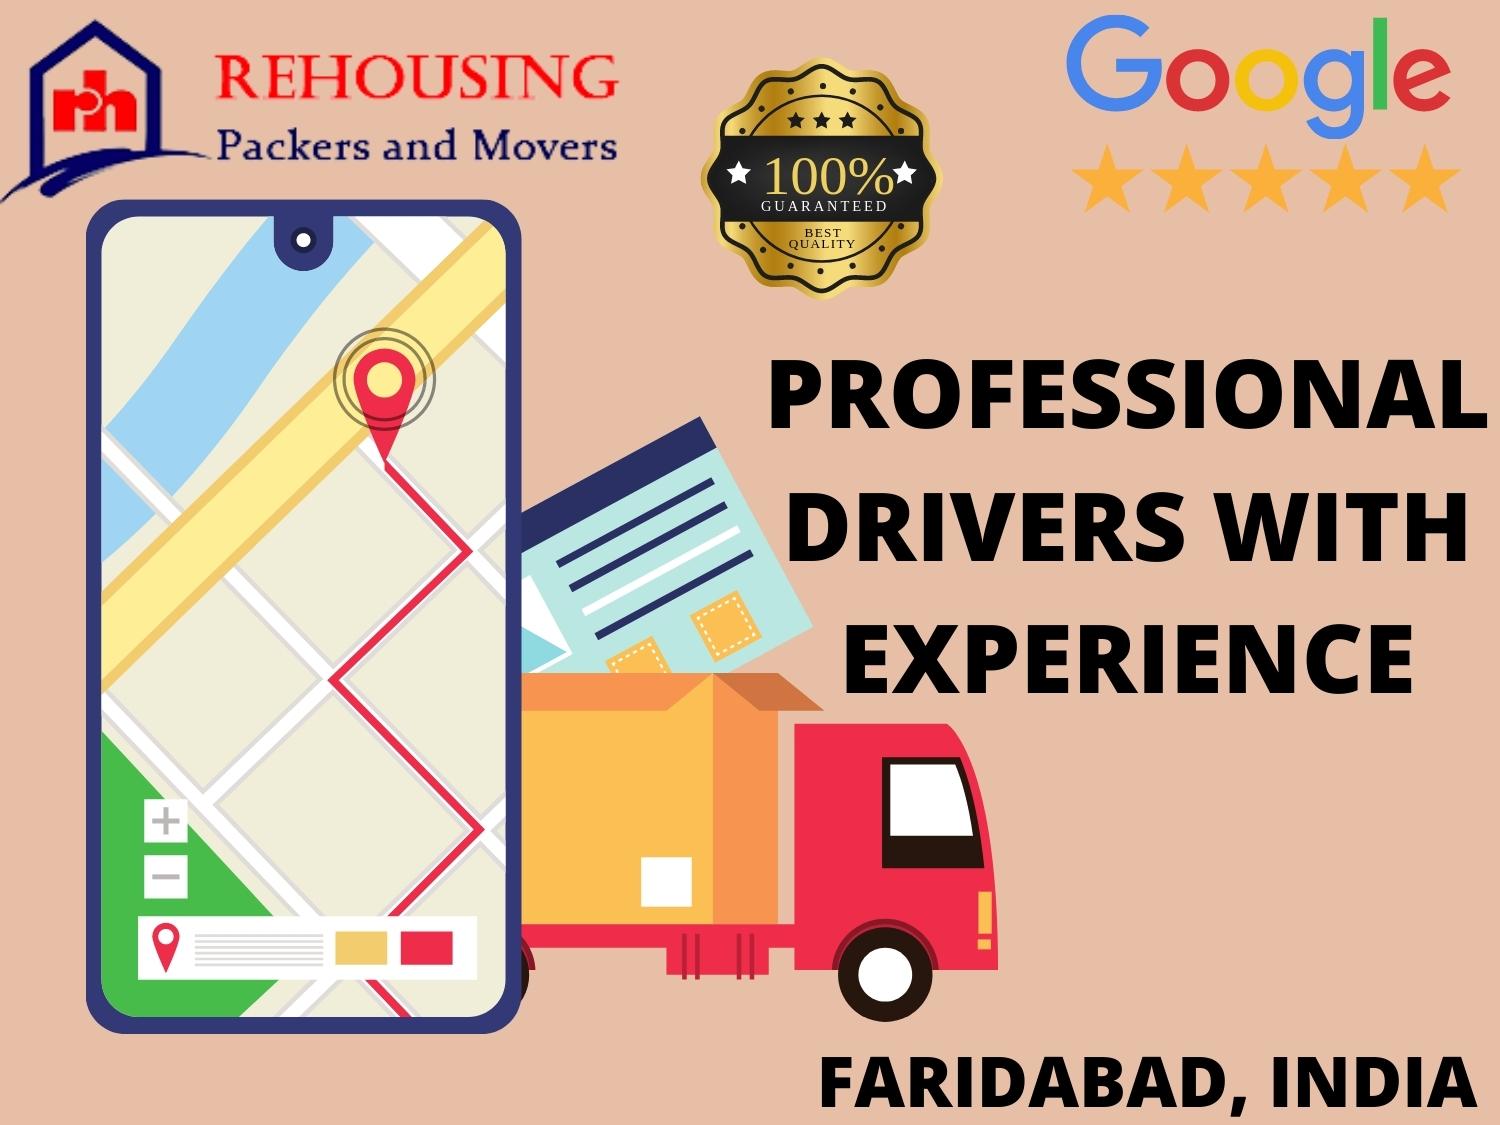 our packers and movers in Faridabad assist you